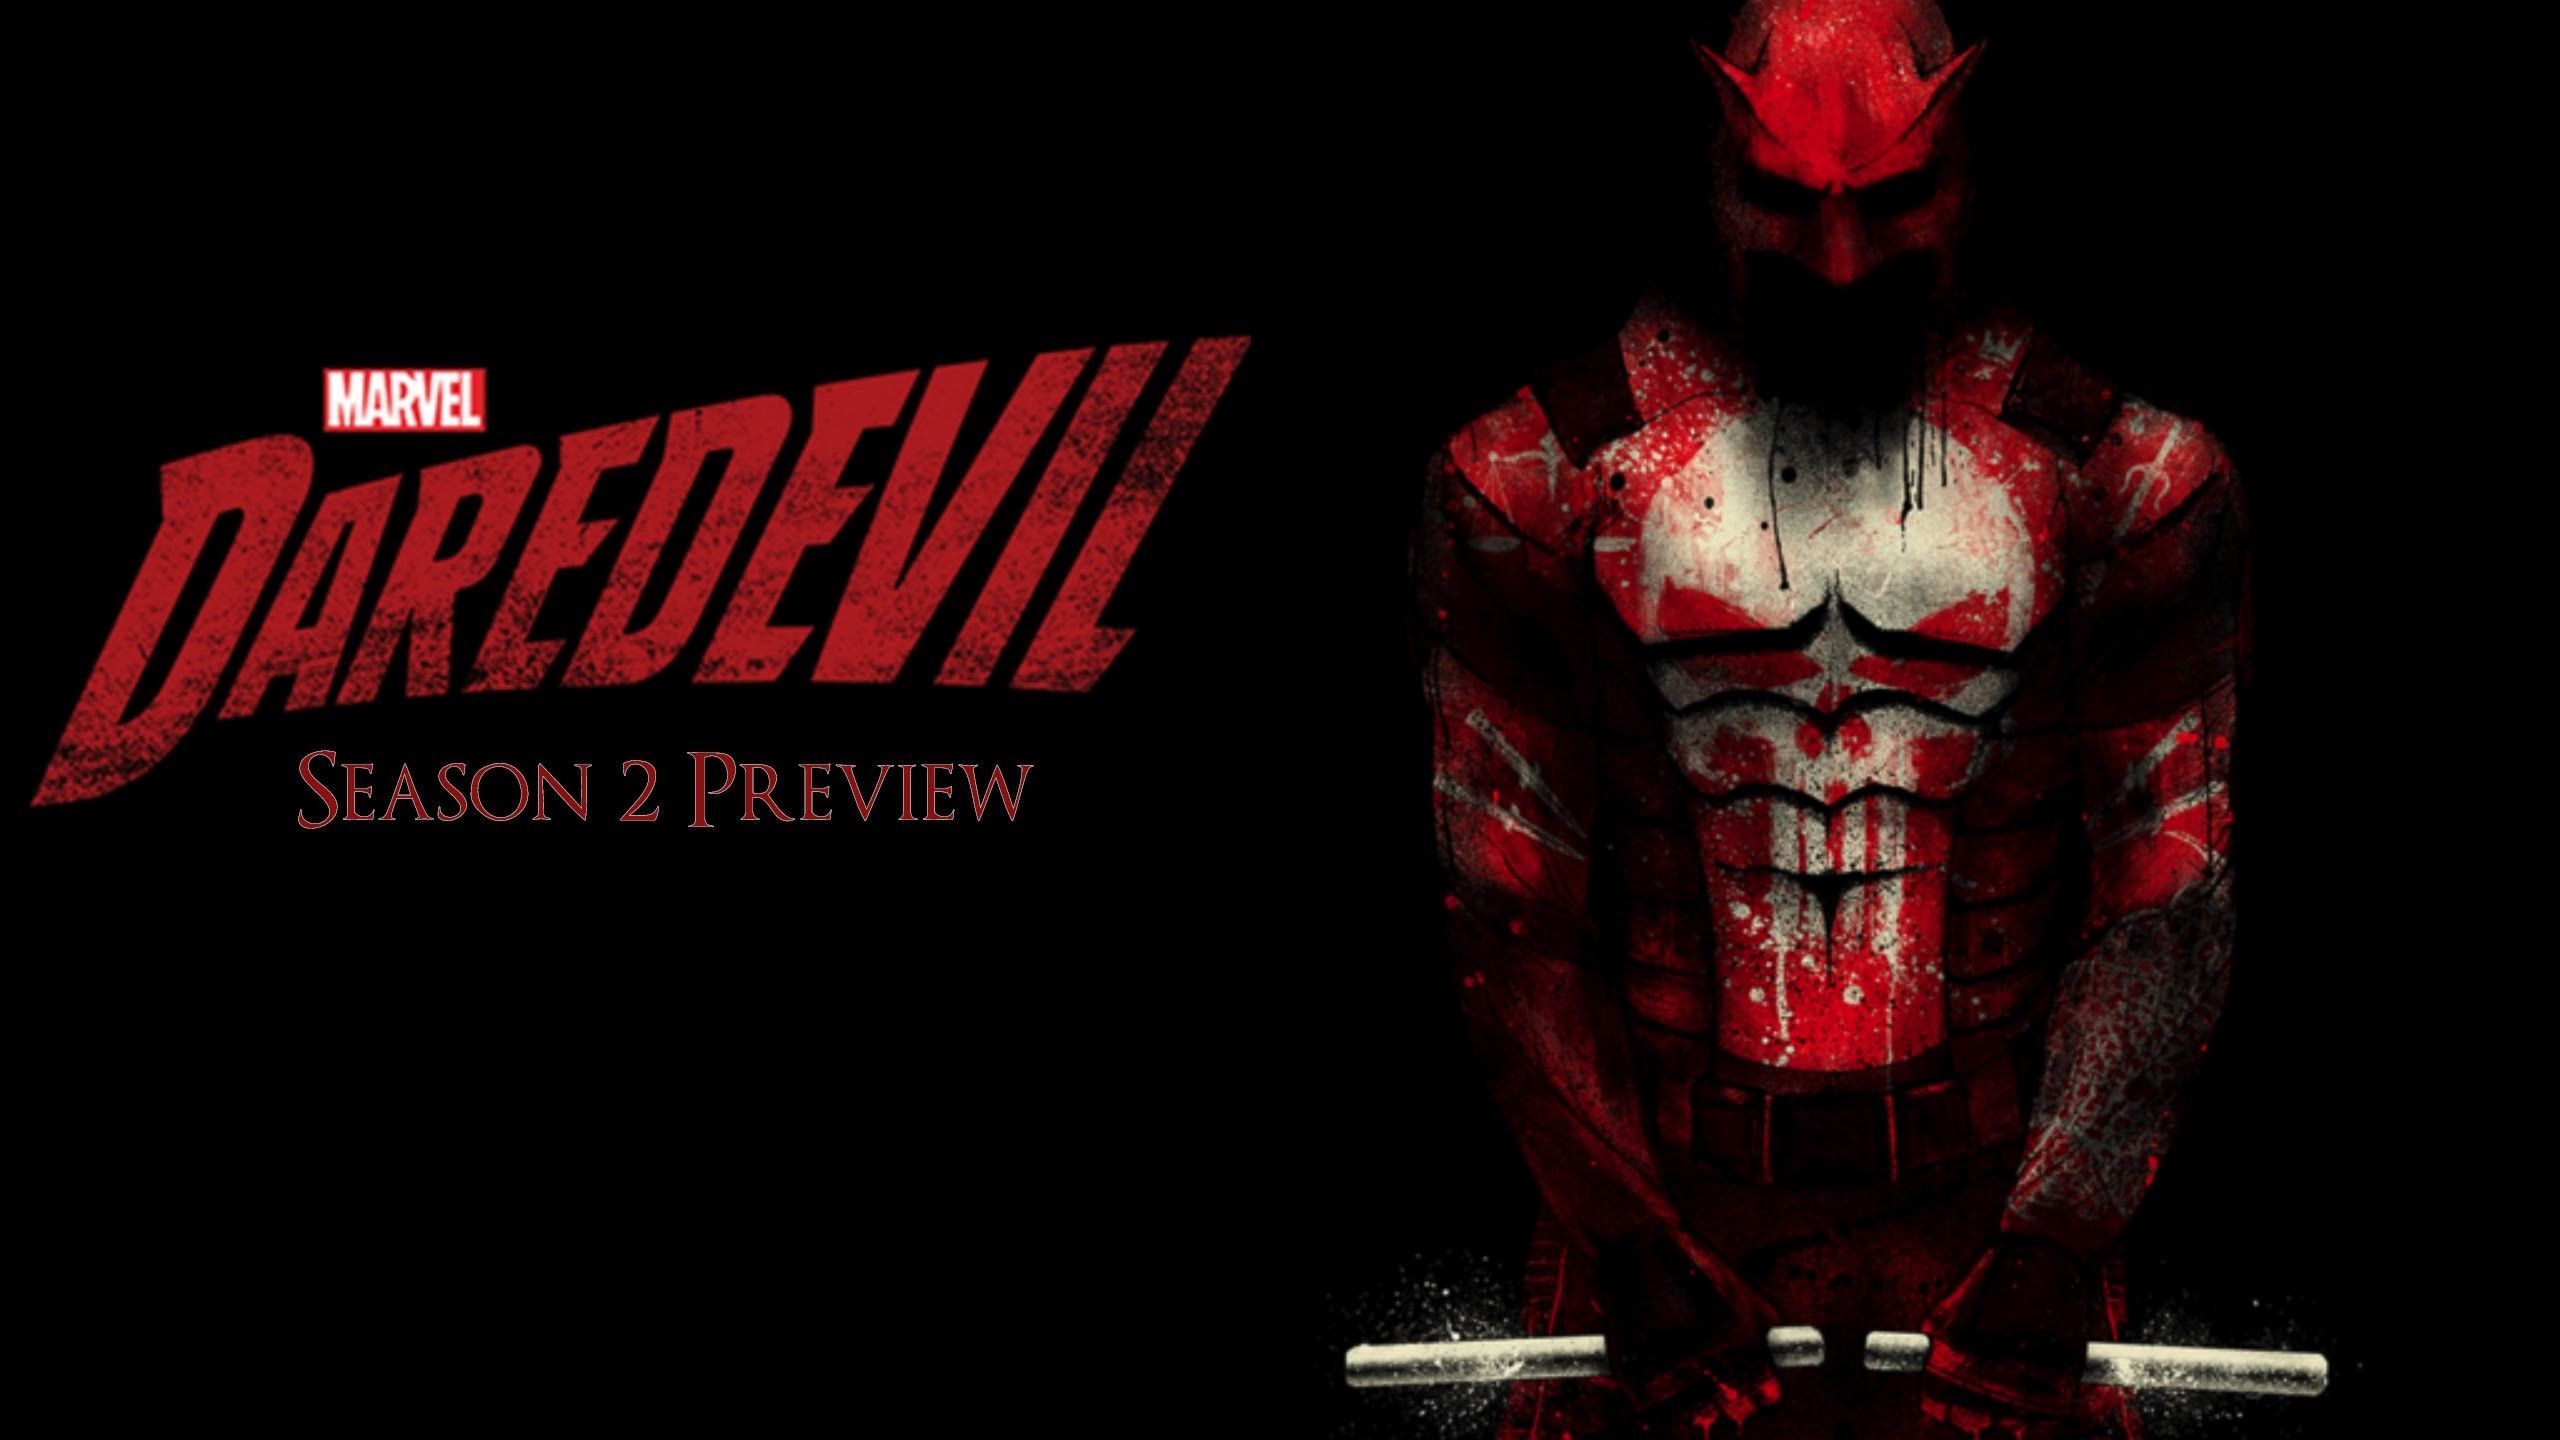 Free download Netflix Daredevil HD Wallpapers 85 image 2560x1440.